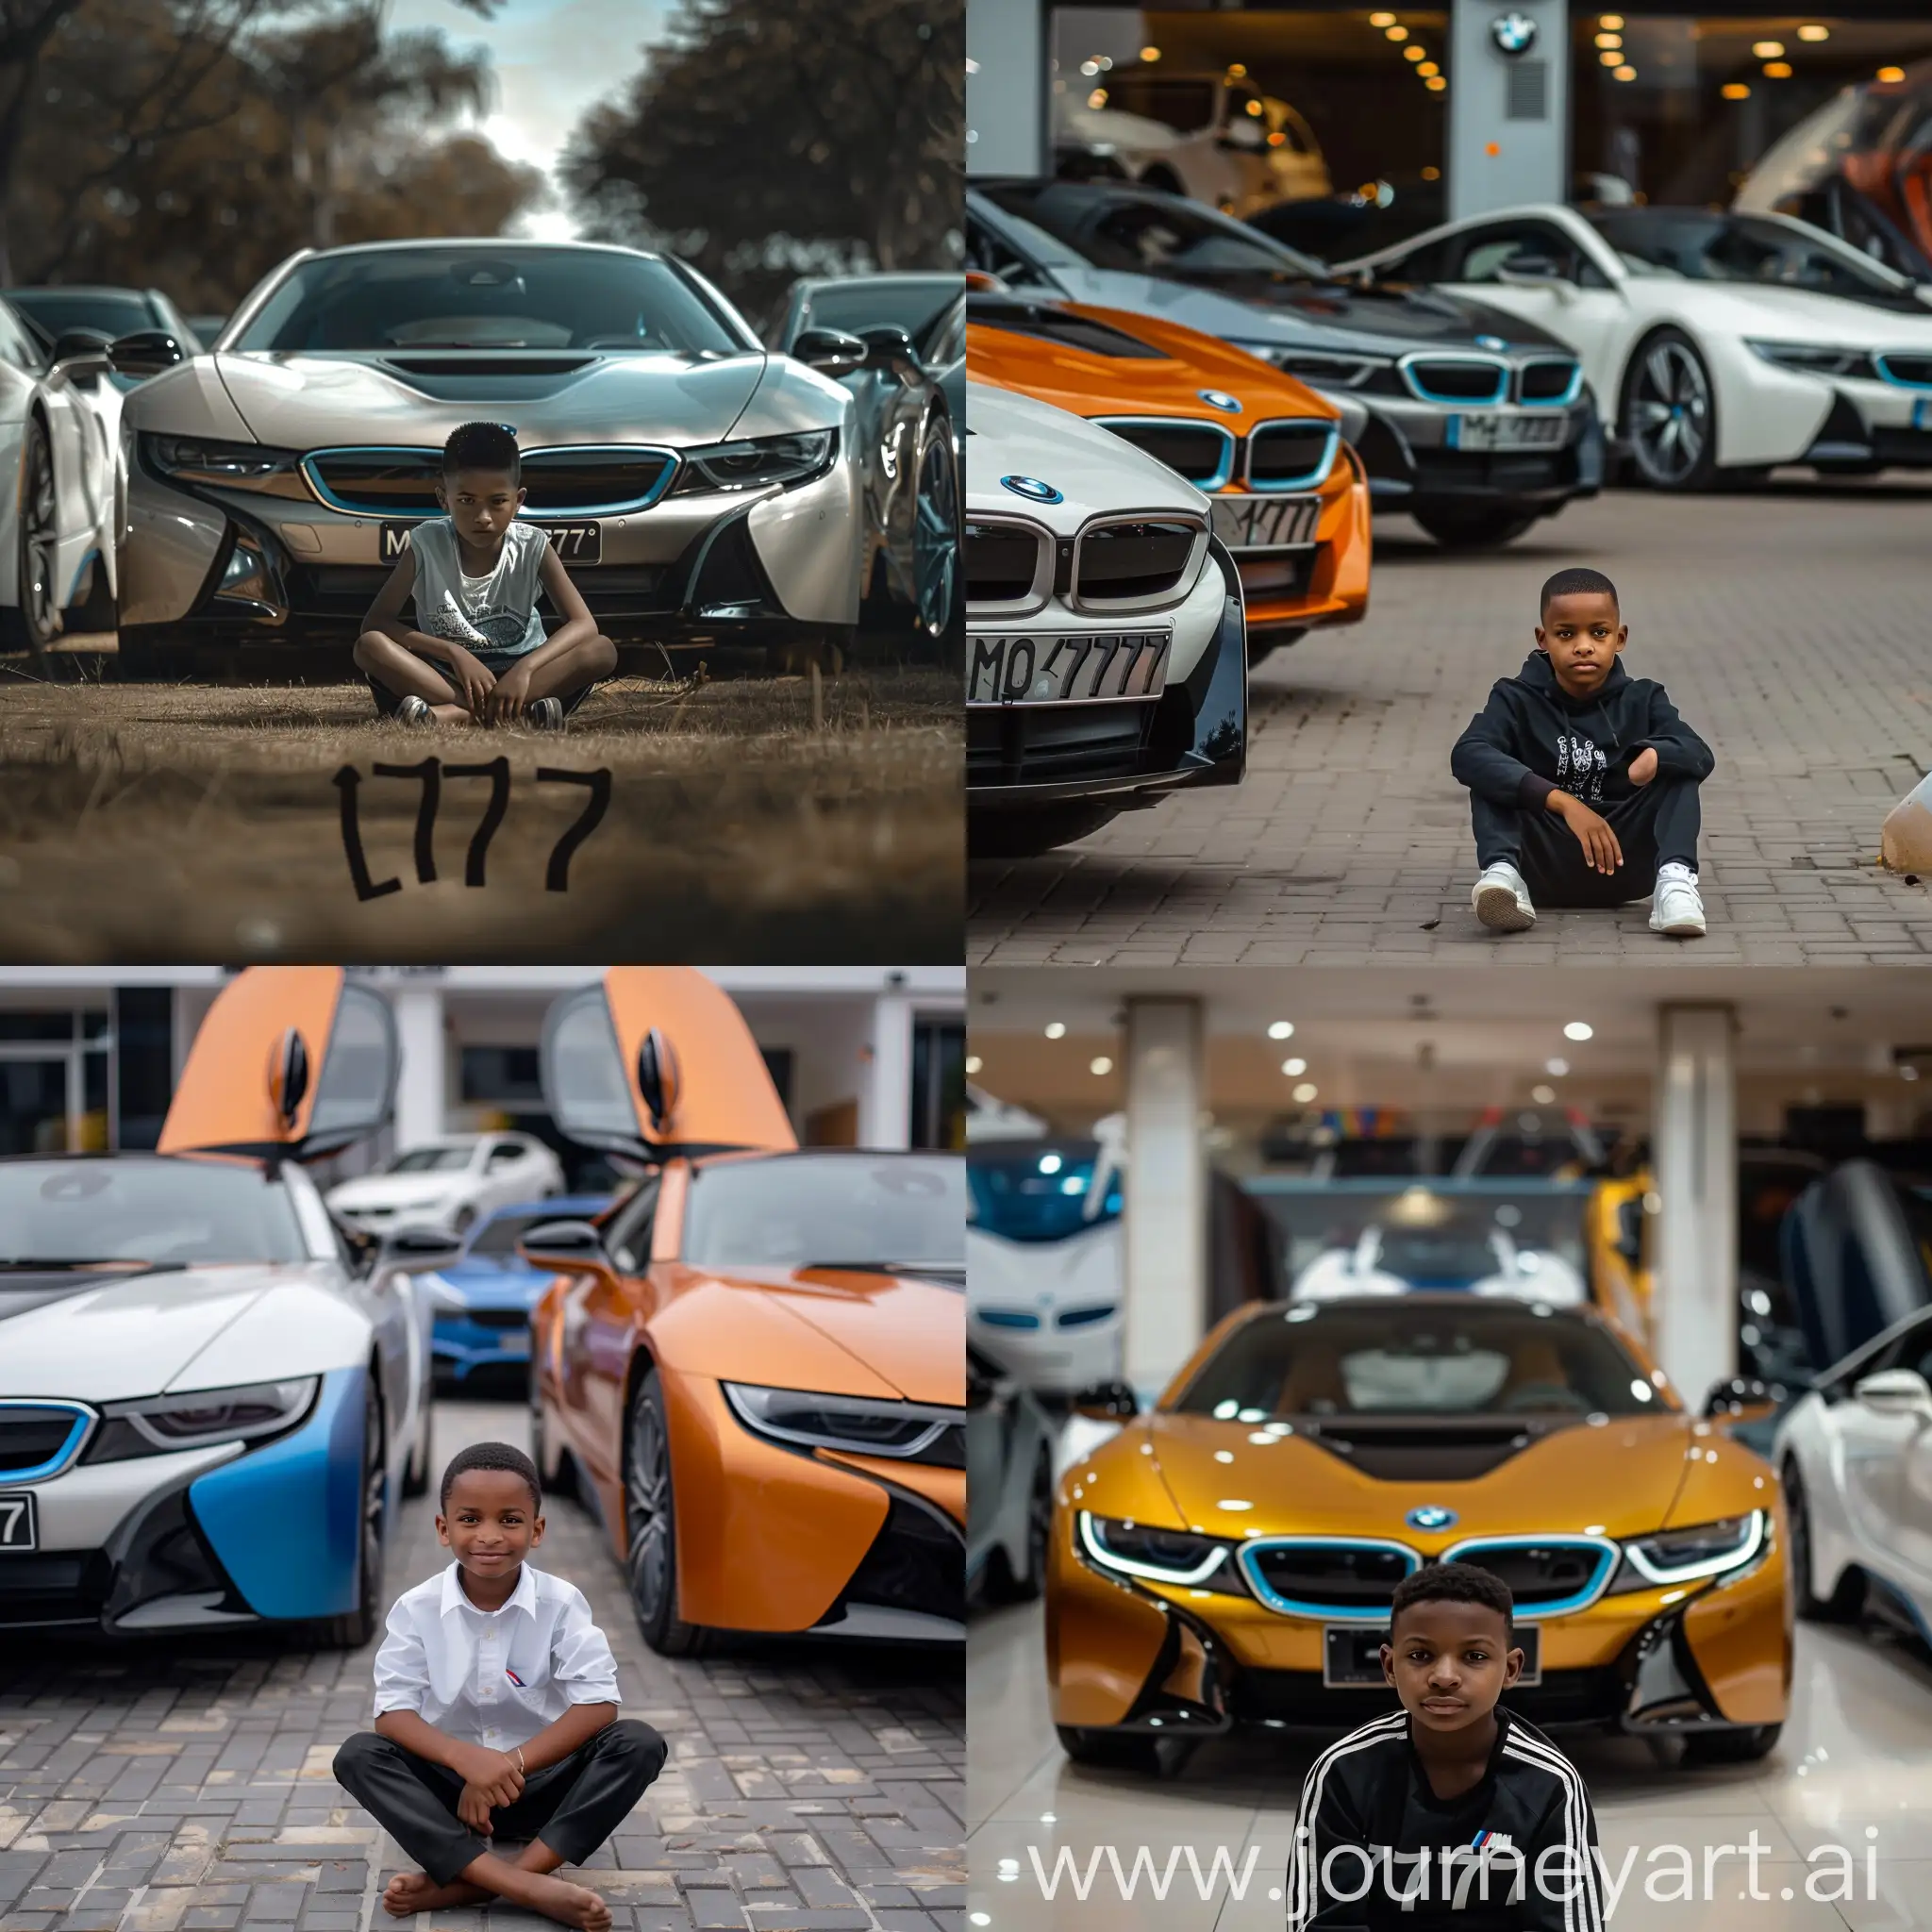 a boy sit infront of bmw cars number is 0777 